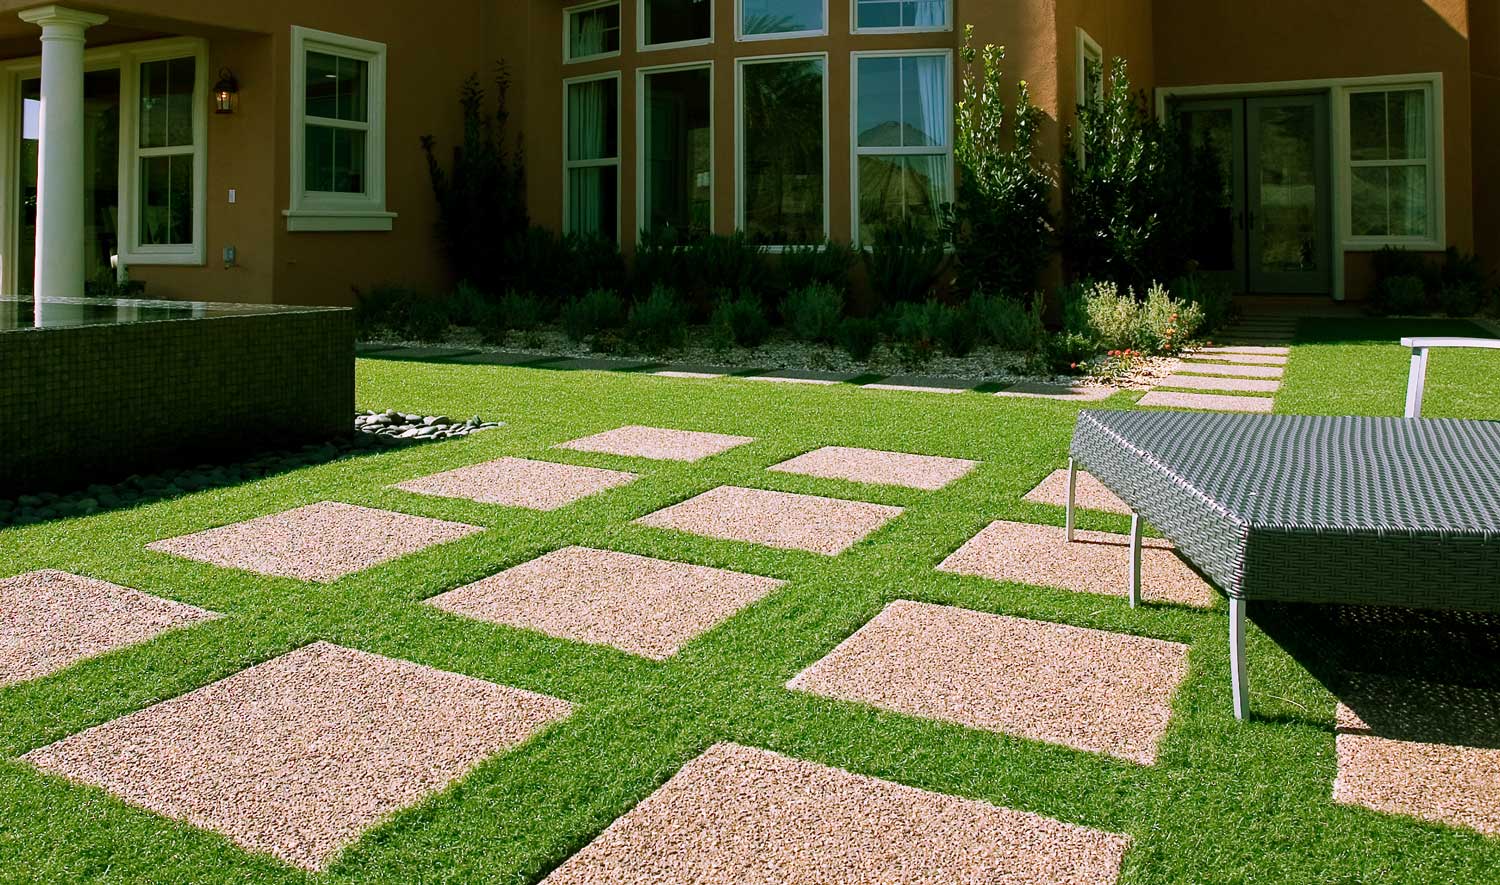 image of artificial grass with large square pavers in backyard